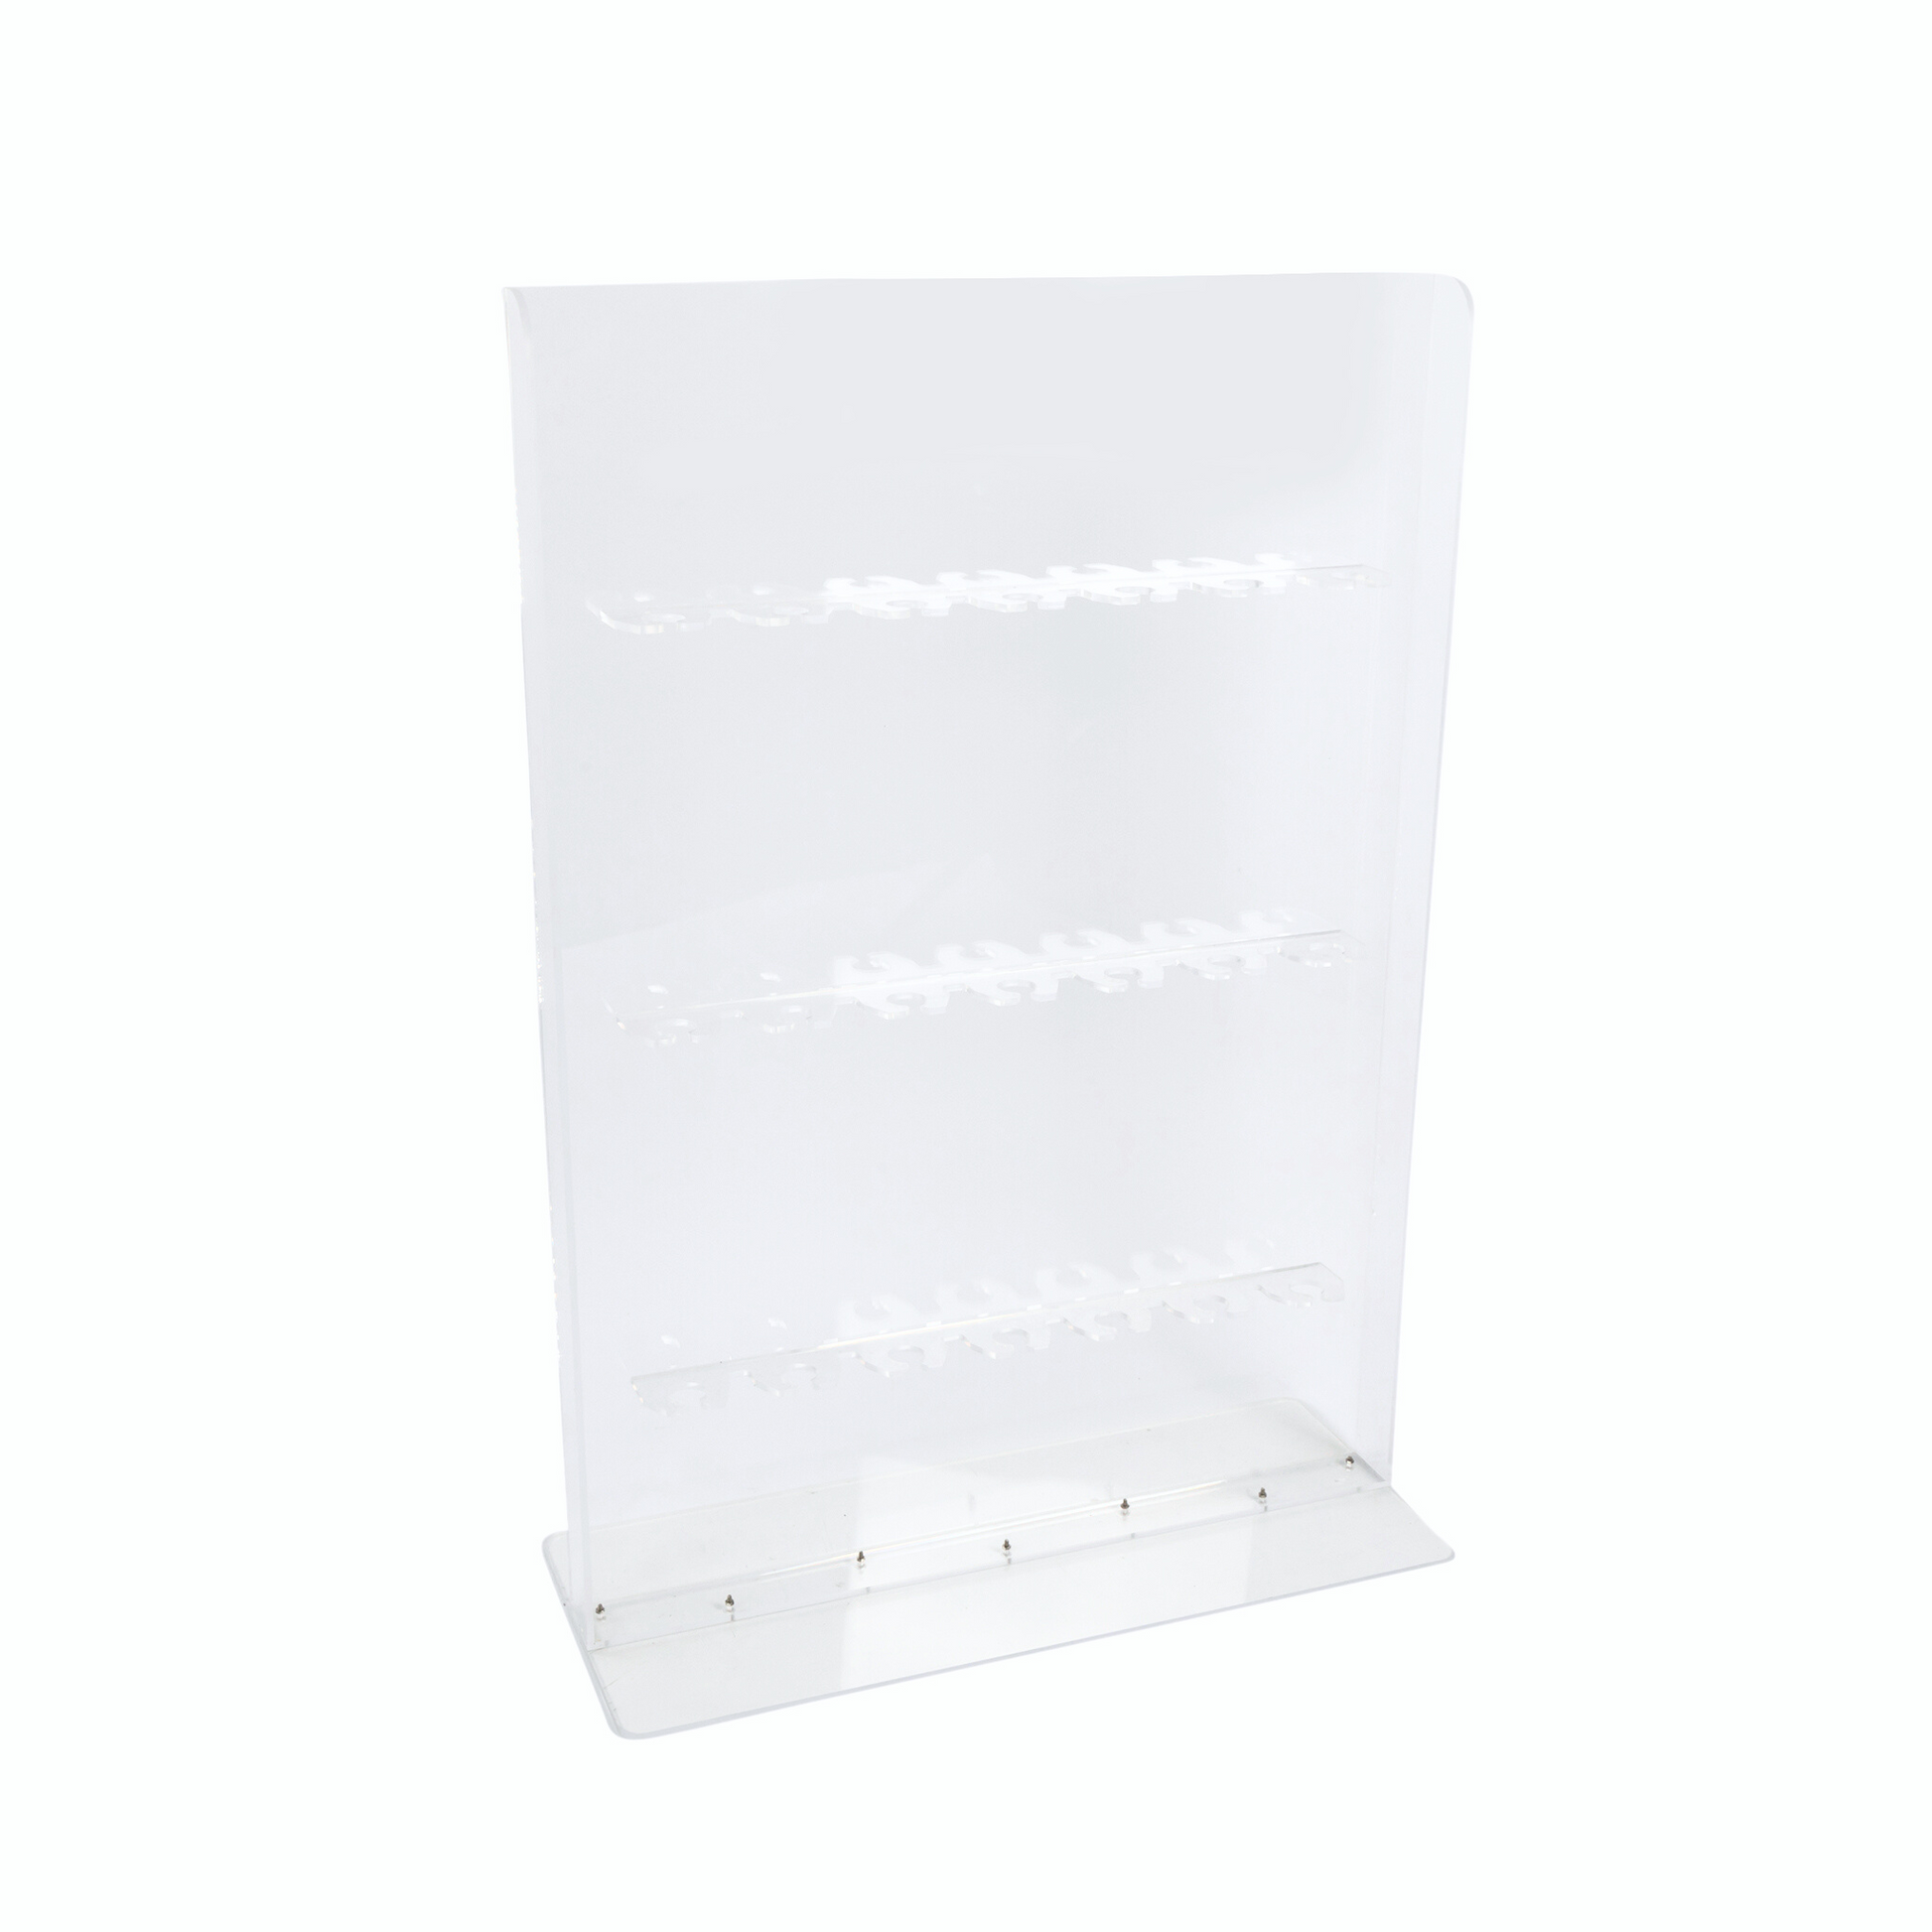 Acrylic Champagne Glass Holder Stand Tabletop Display